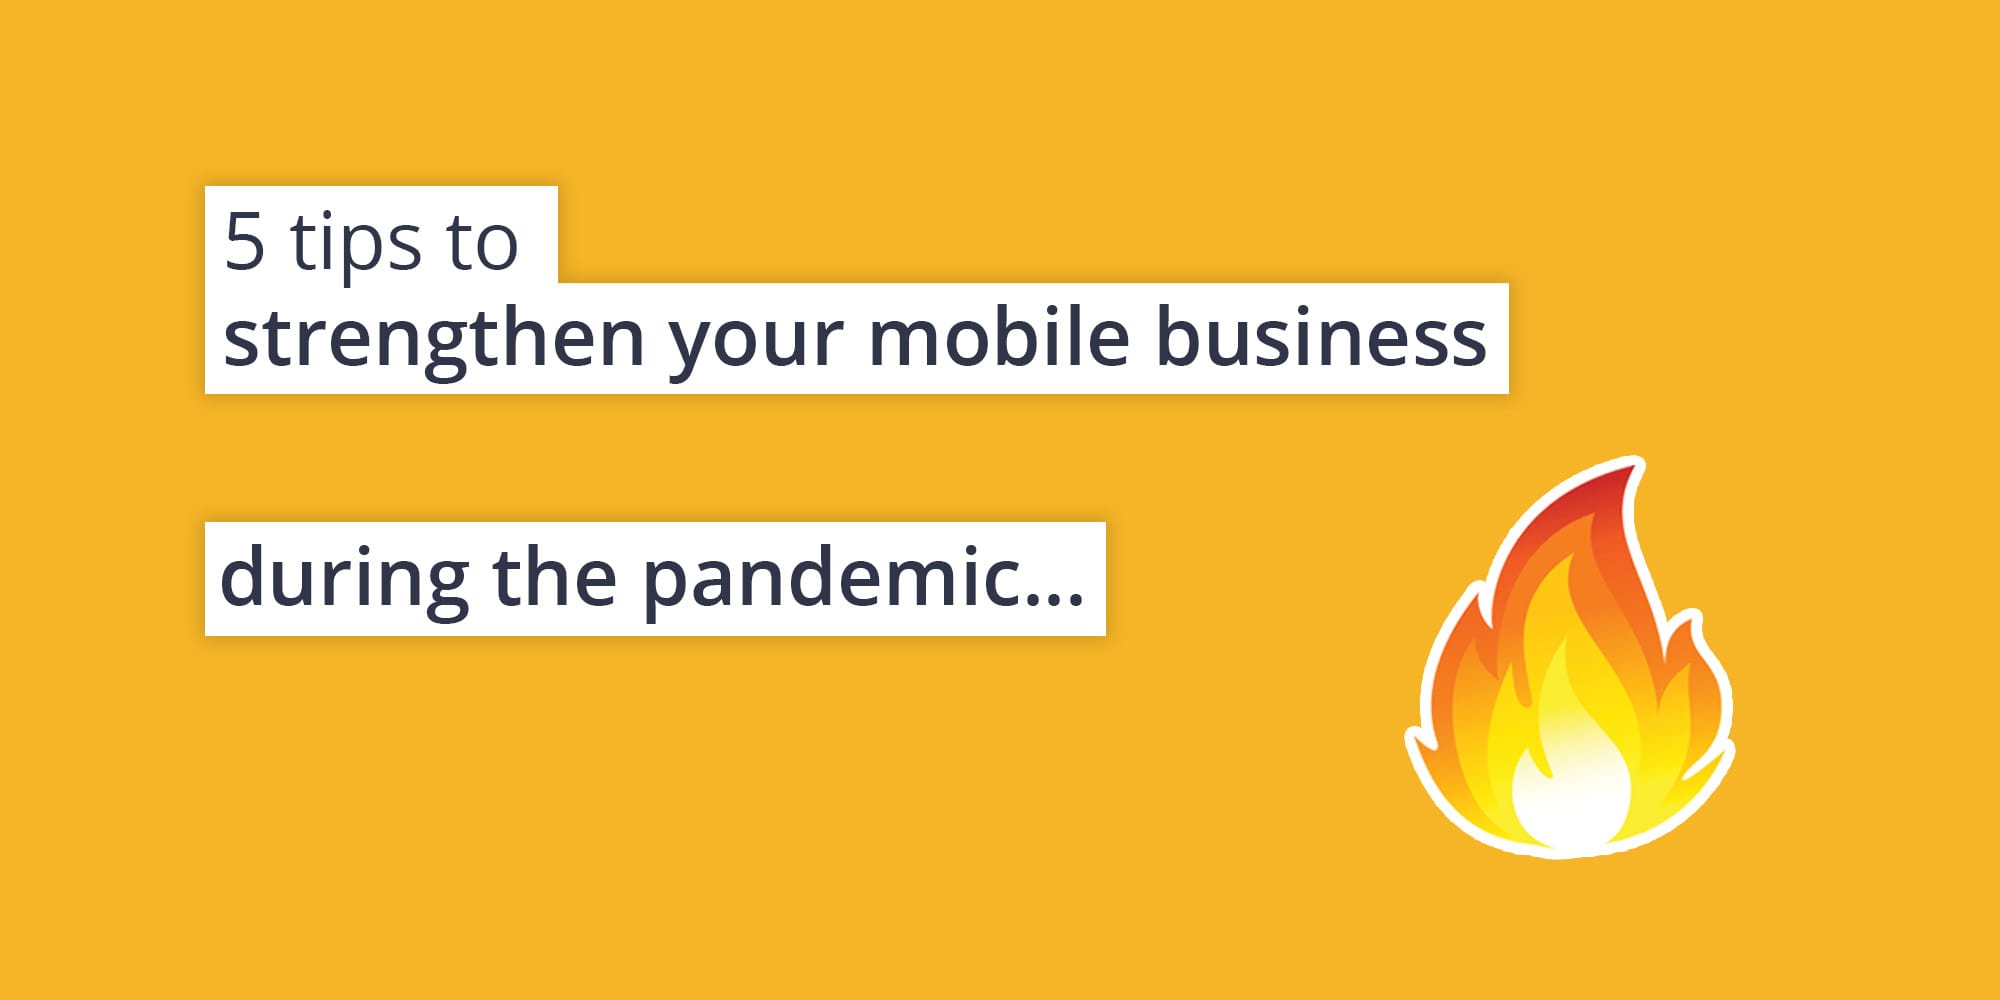 5 ways to buoy your mobile business during the pandemic